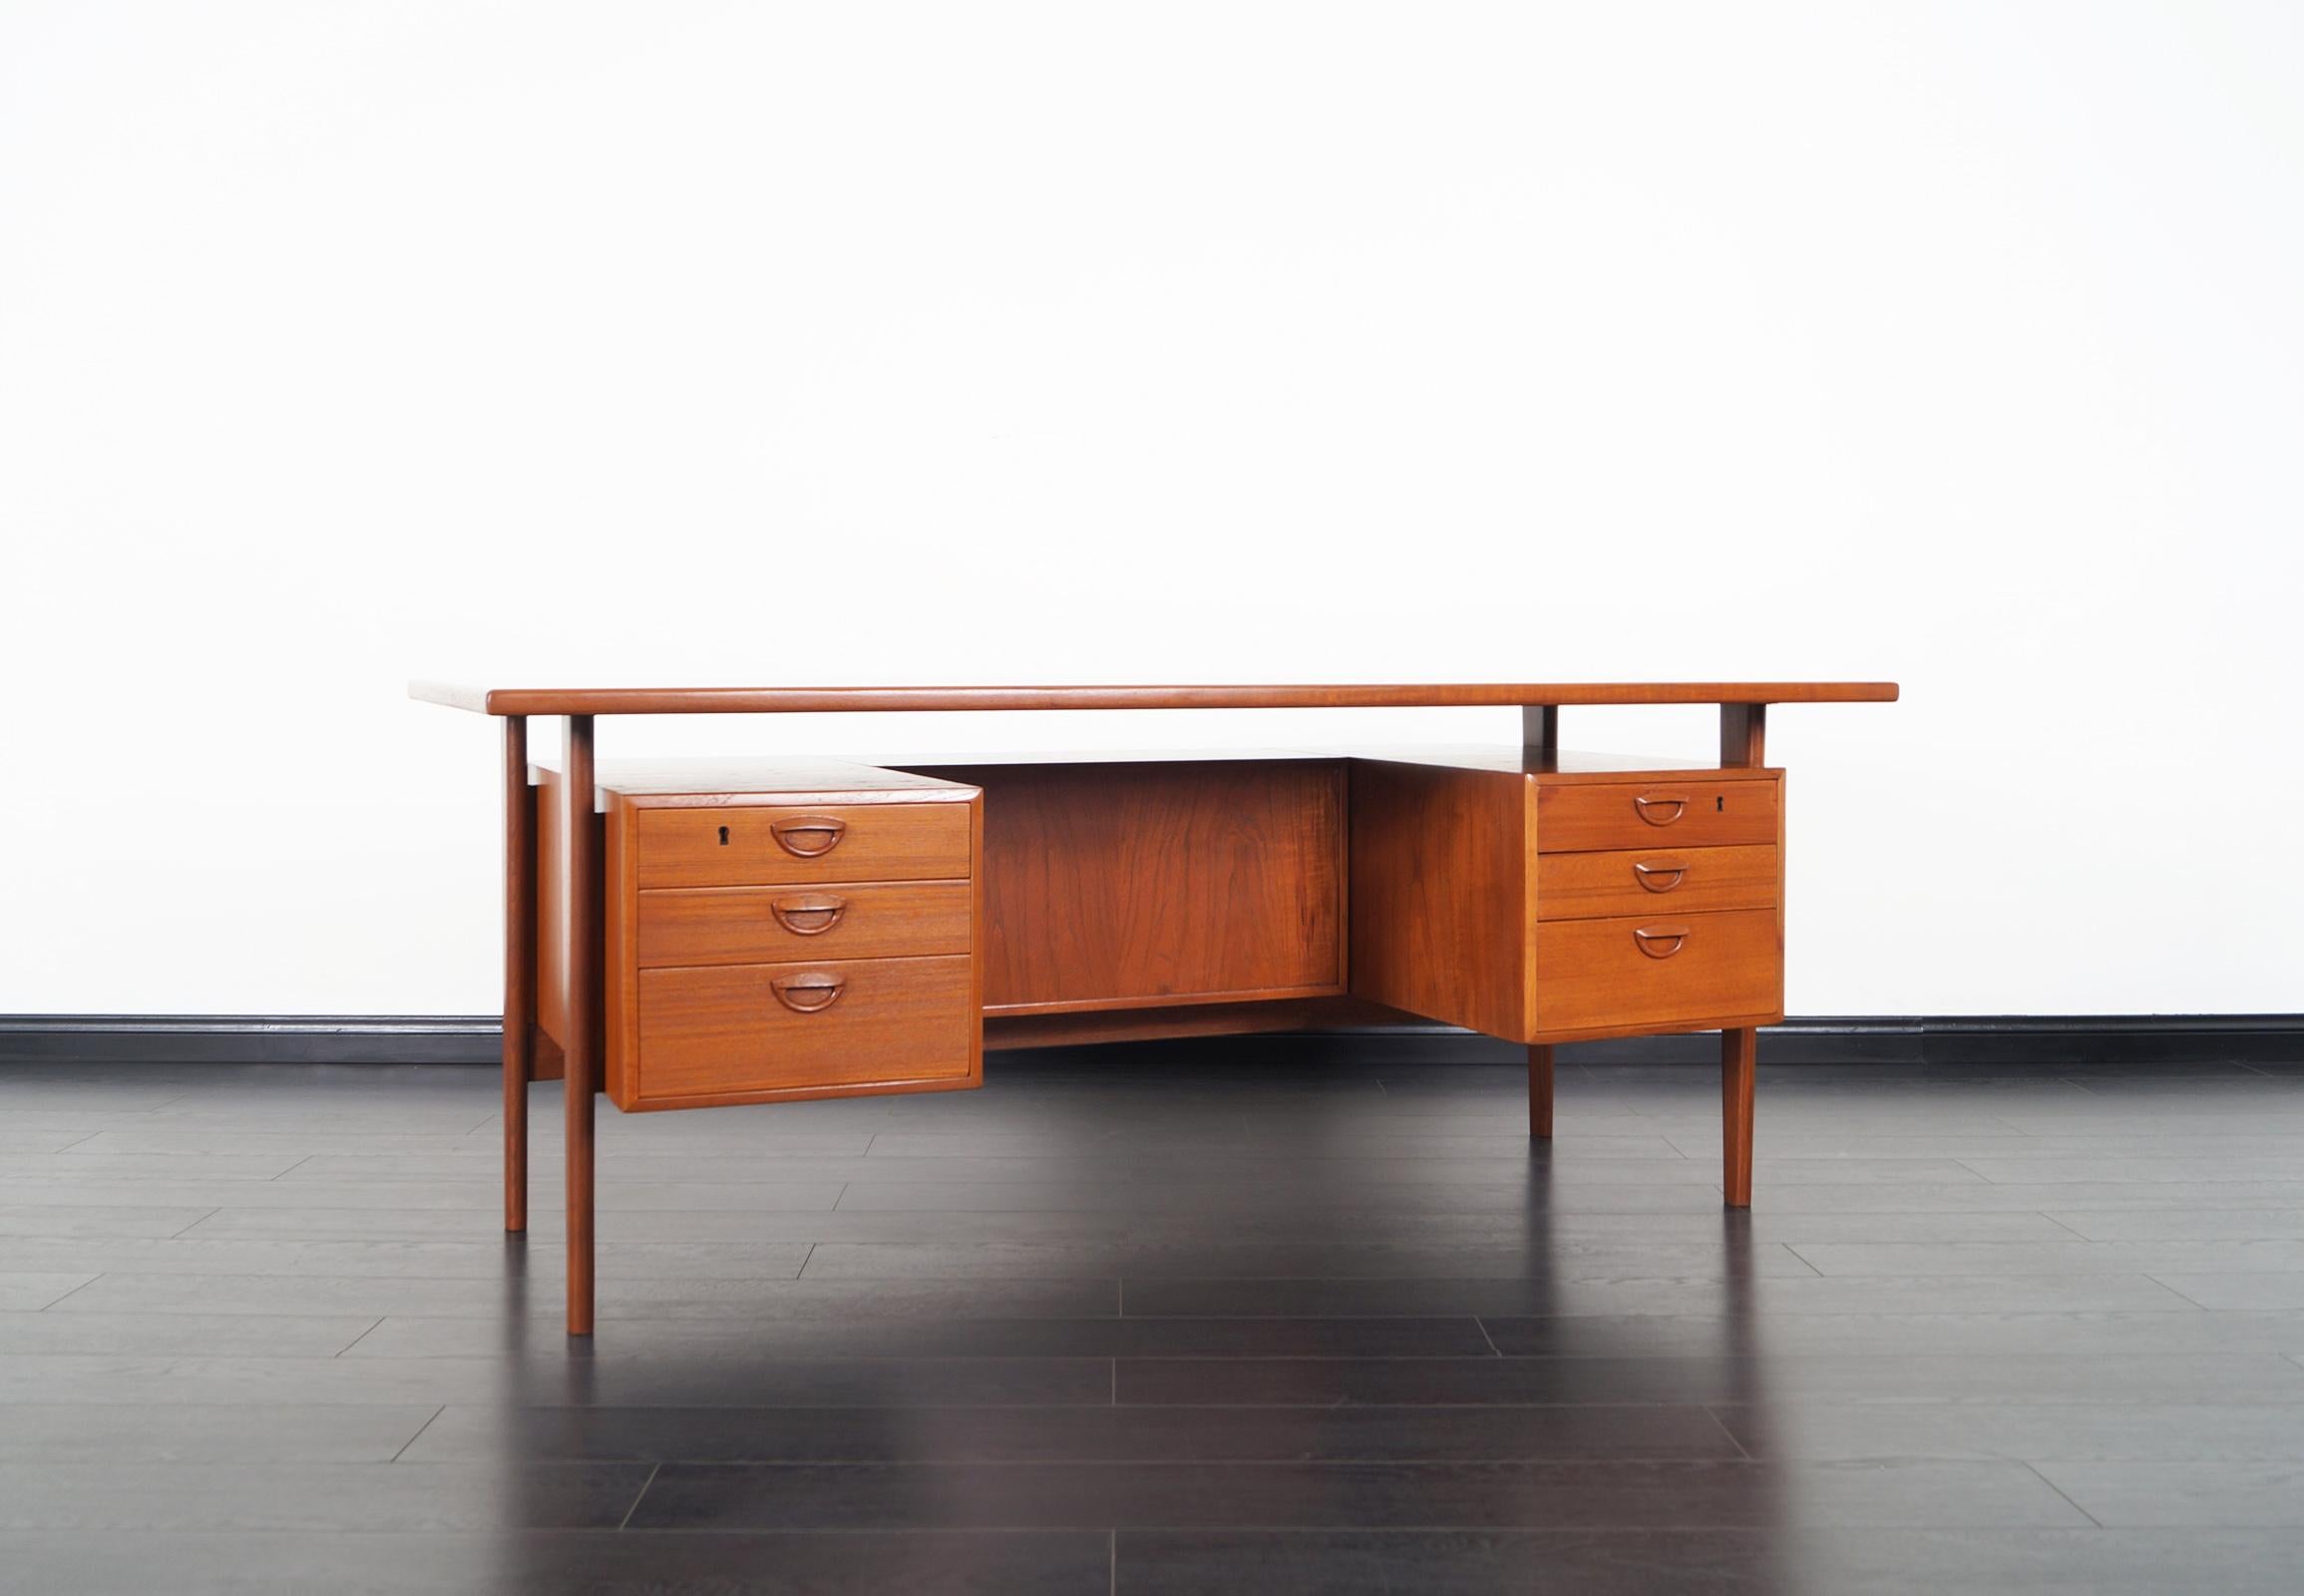 Amazing danish teak executive desk designed by Kai Kristiansen for Feldballes Møbelfrabrik, model FM 60. This freestanding desk features a floating top, six dovetailed drawers in the front, at the rear two extra storage units, and a open space for